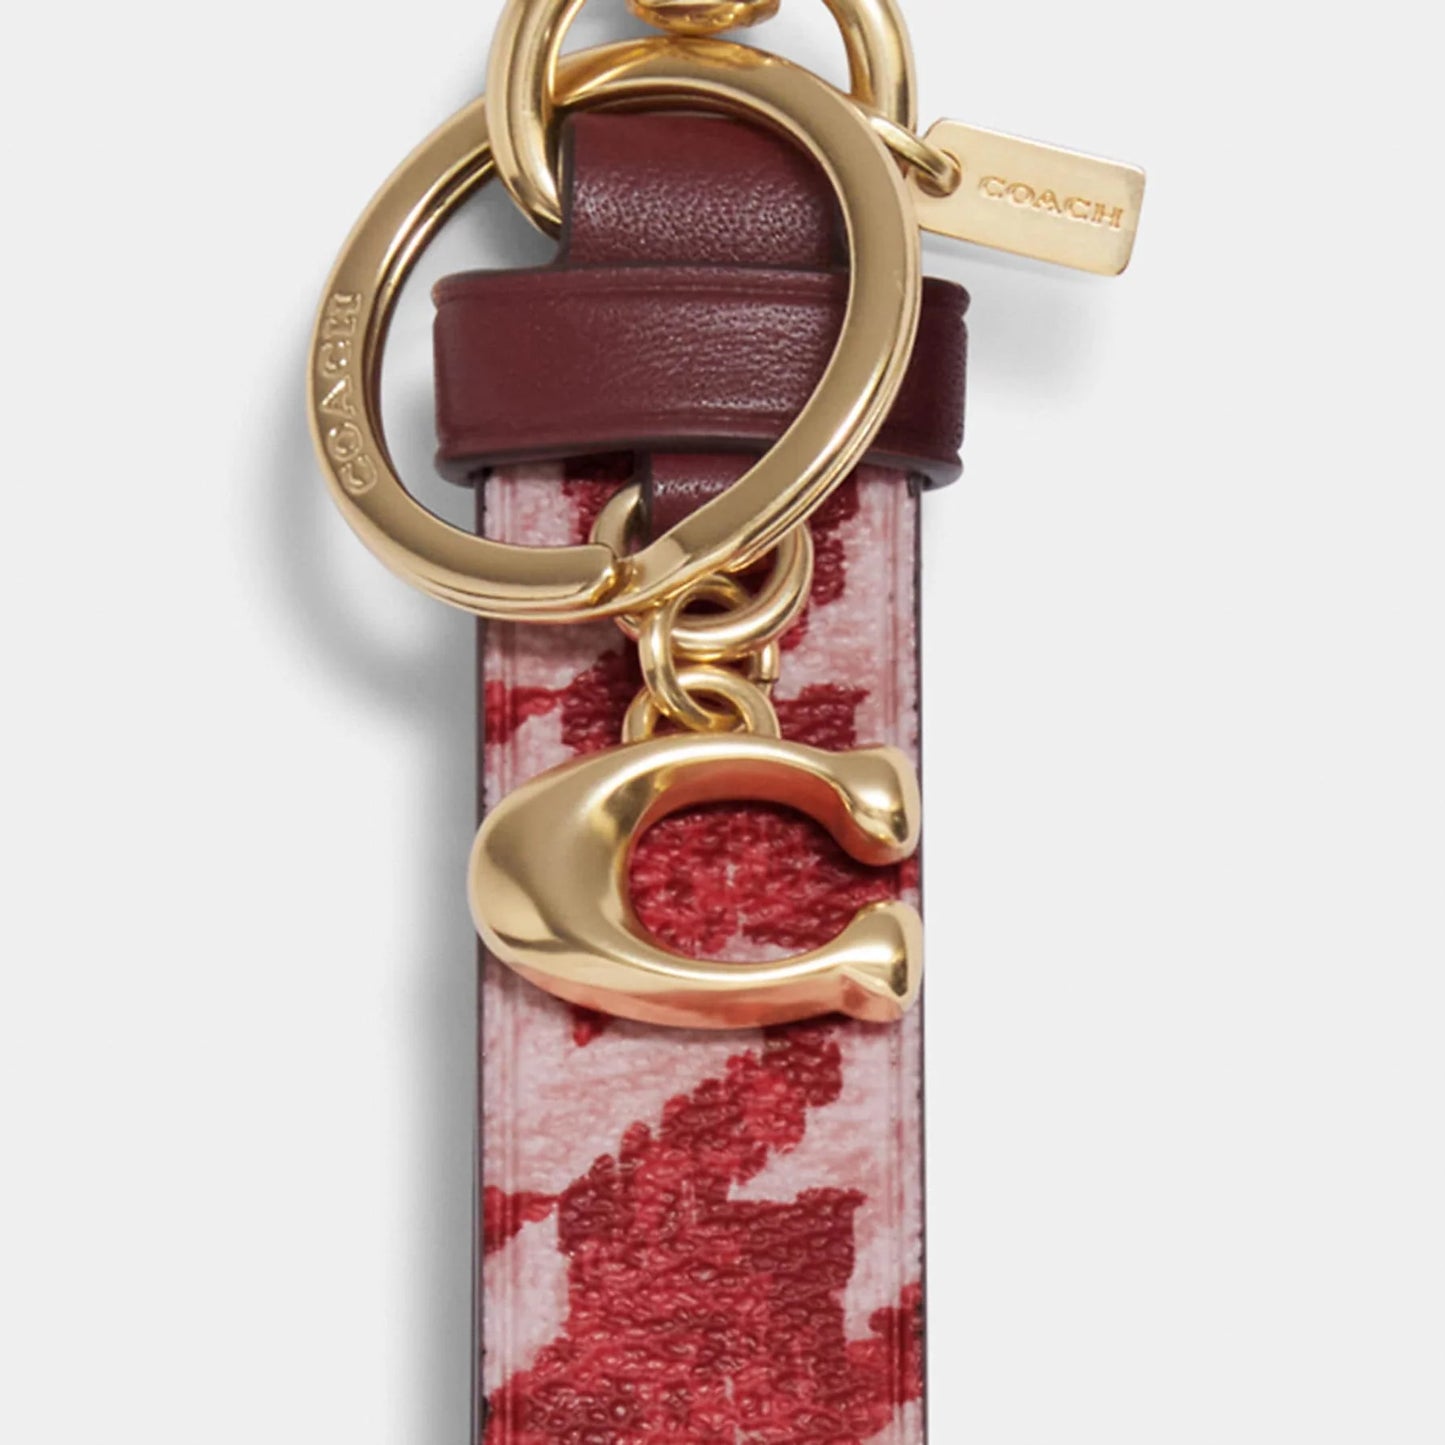 Llavero Coach Loop Bag Charm With Houndstooth Print - Pink/Red